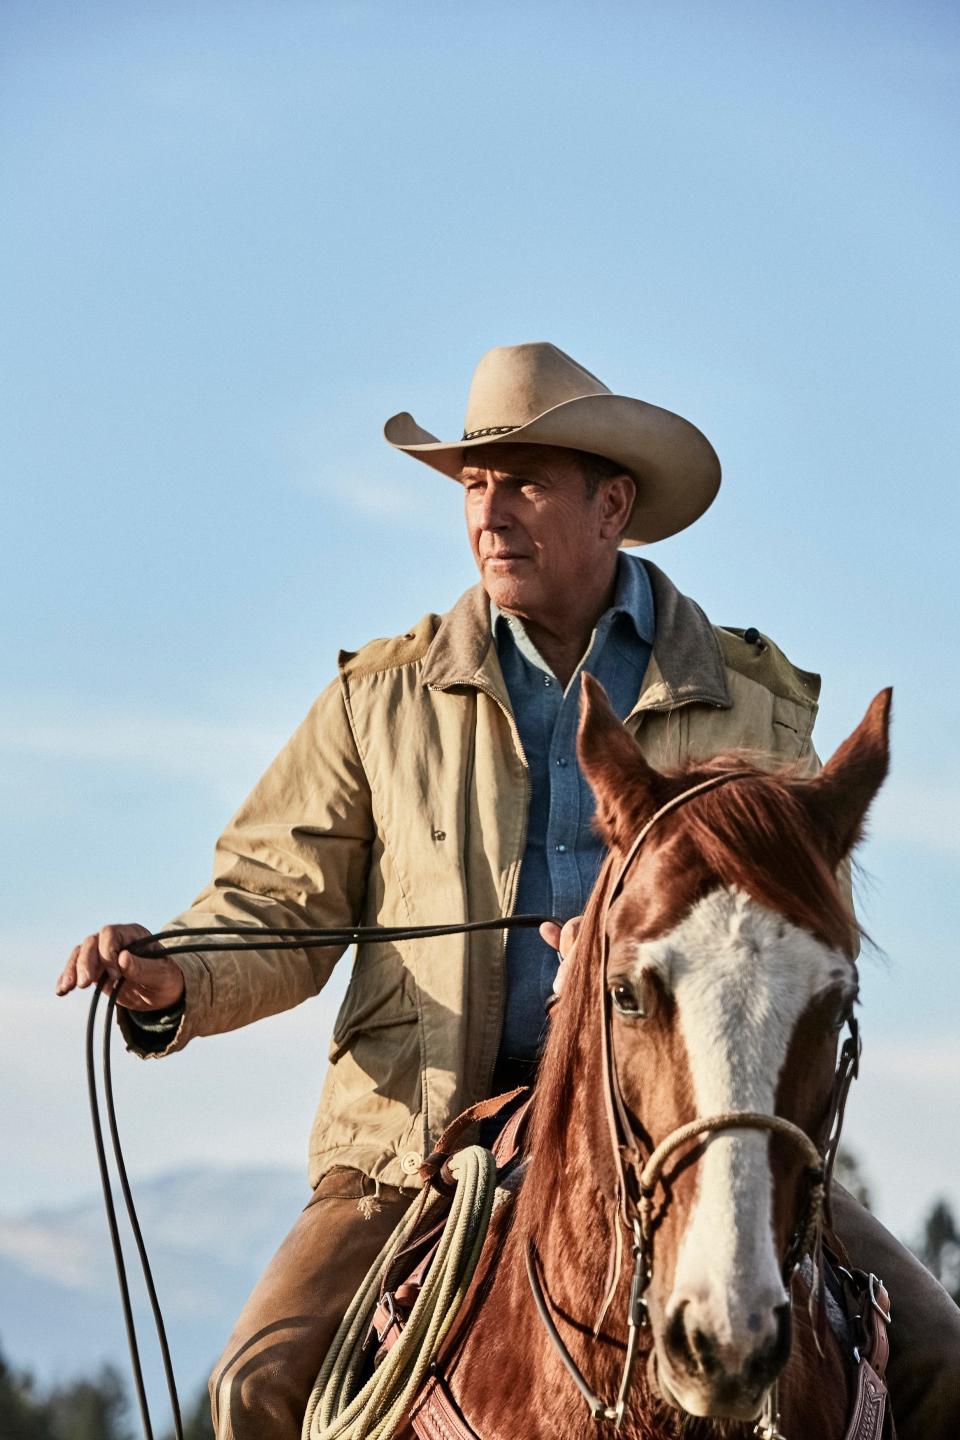 Kevin Costner is open to returning to his role in "Yellowstone" after dramatic exit.